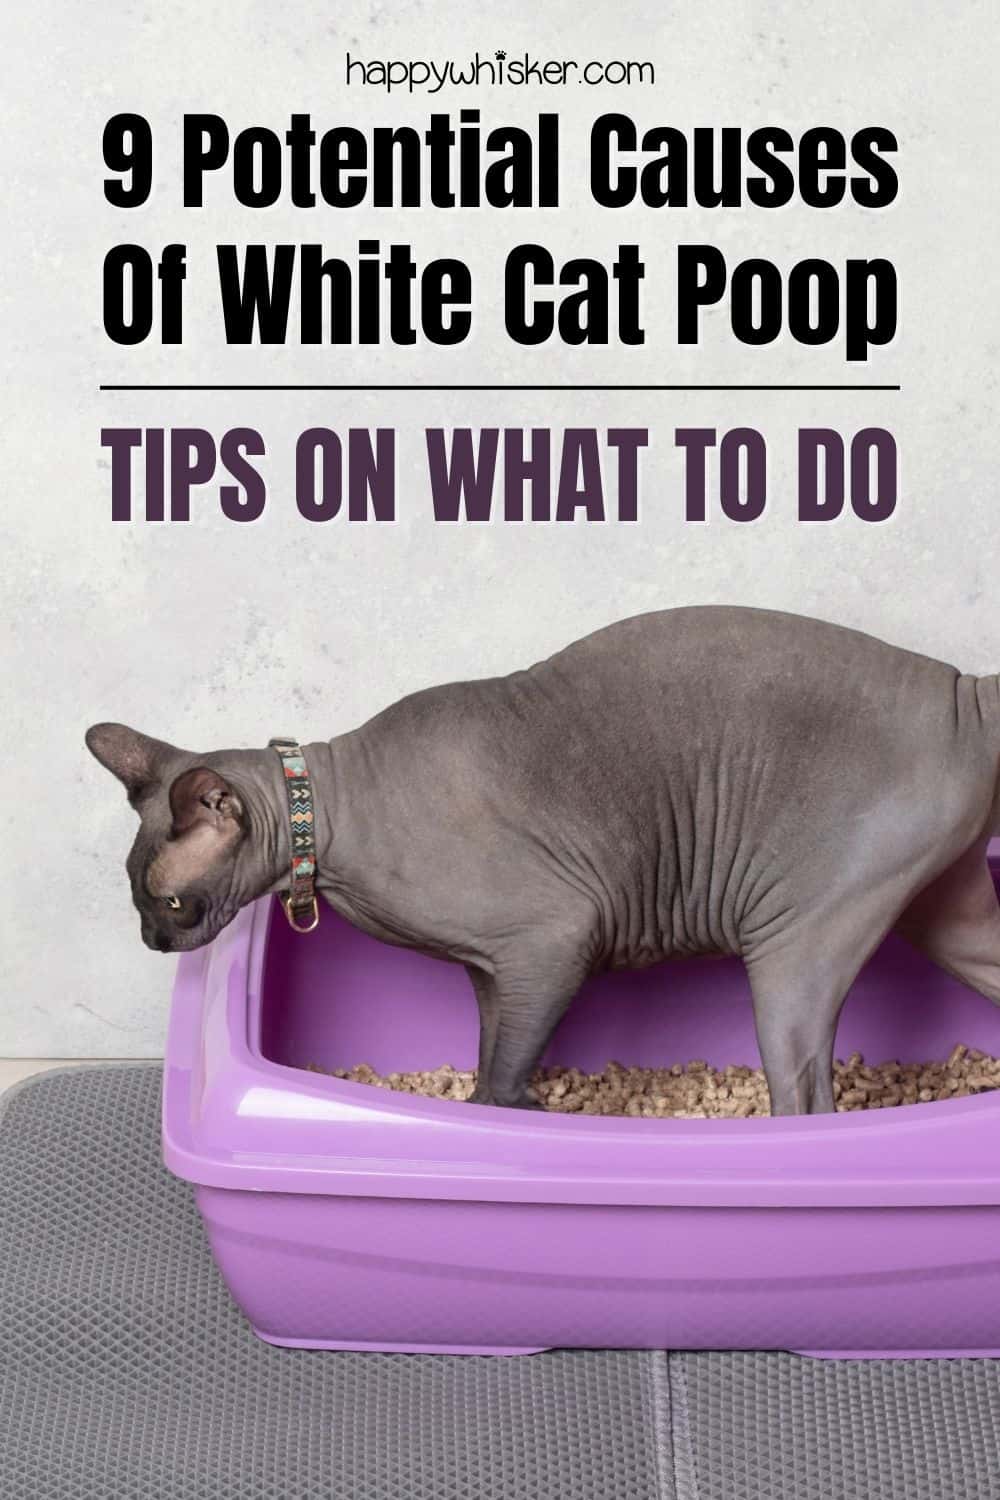 9 Potential Causes Of White Cat Poop - Tips On What To Do Pinterest